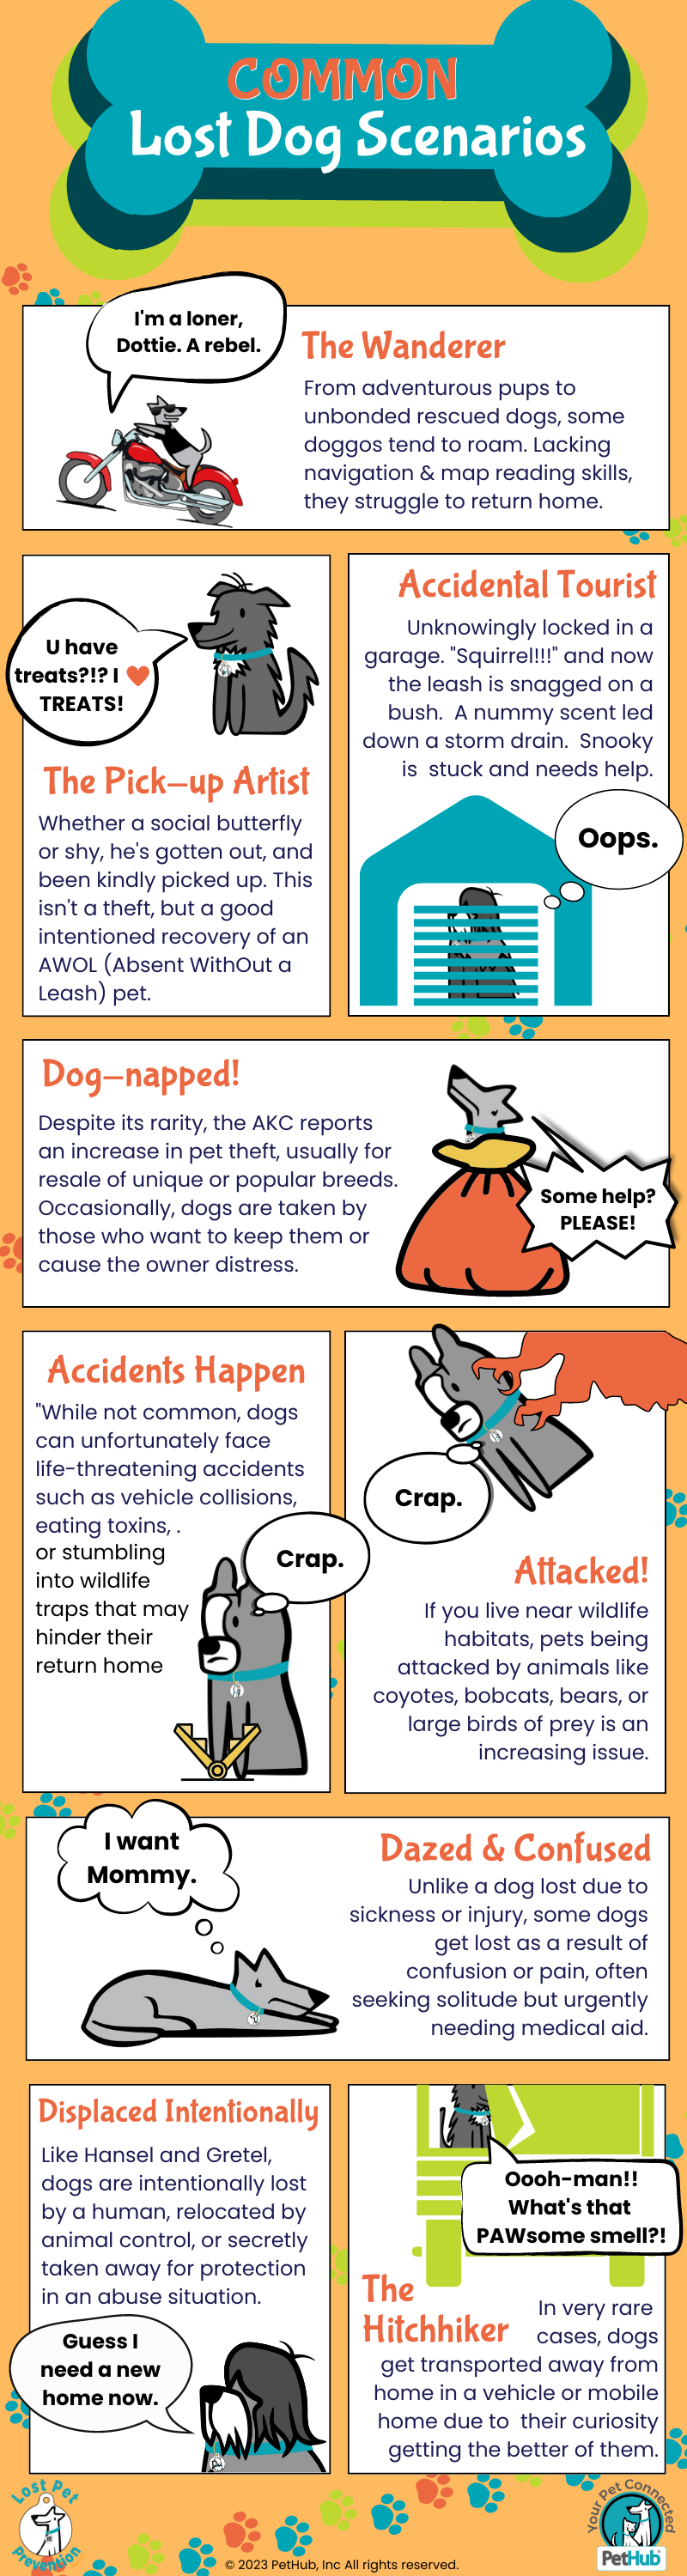 An infographic showing common lost dog scenarios